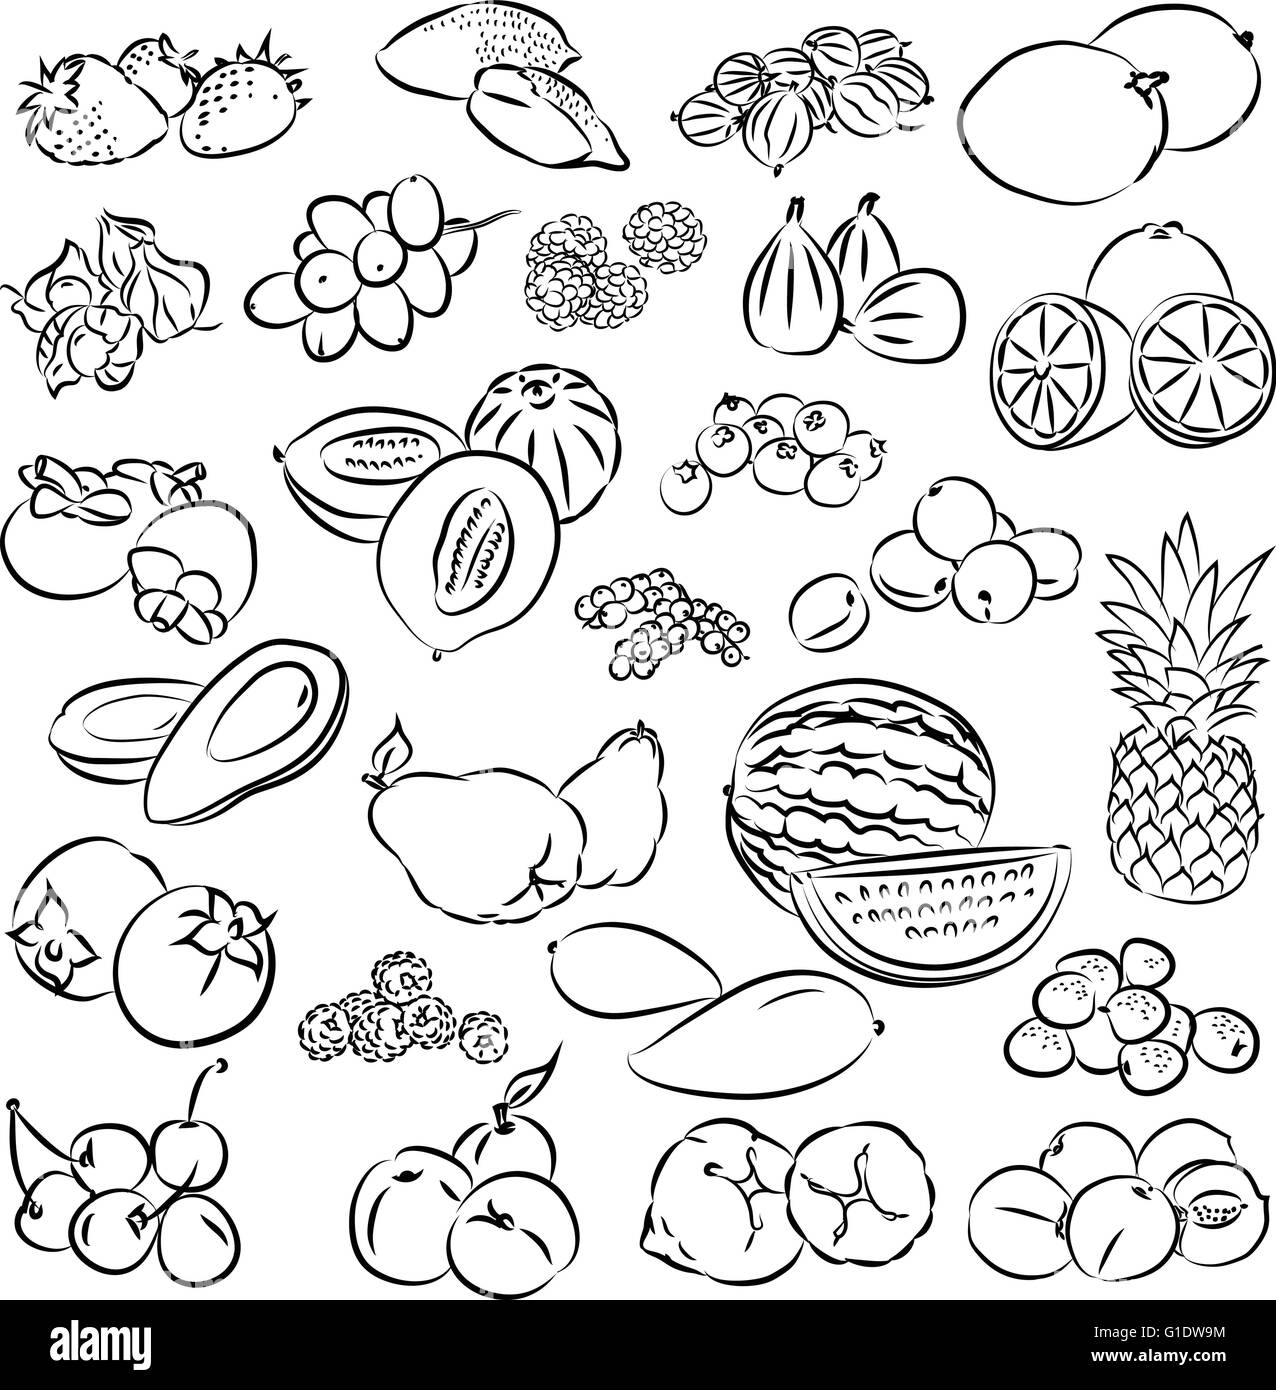 vector illustration of fruit collection in line art mode Stock Vector